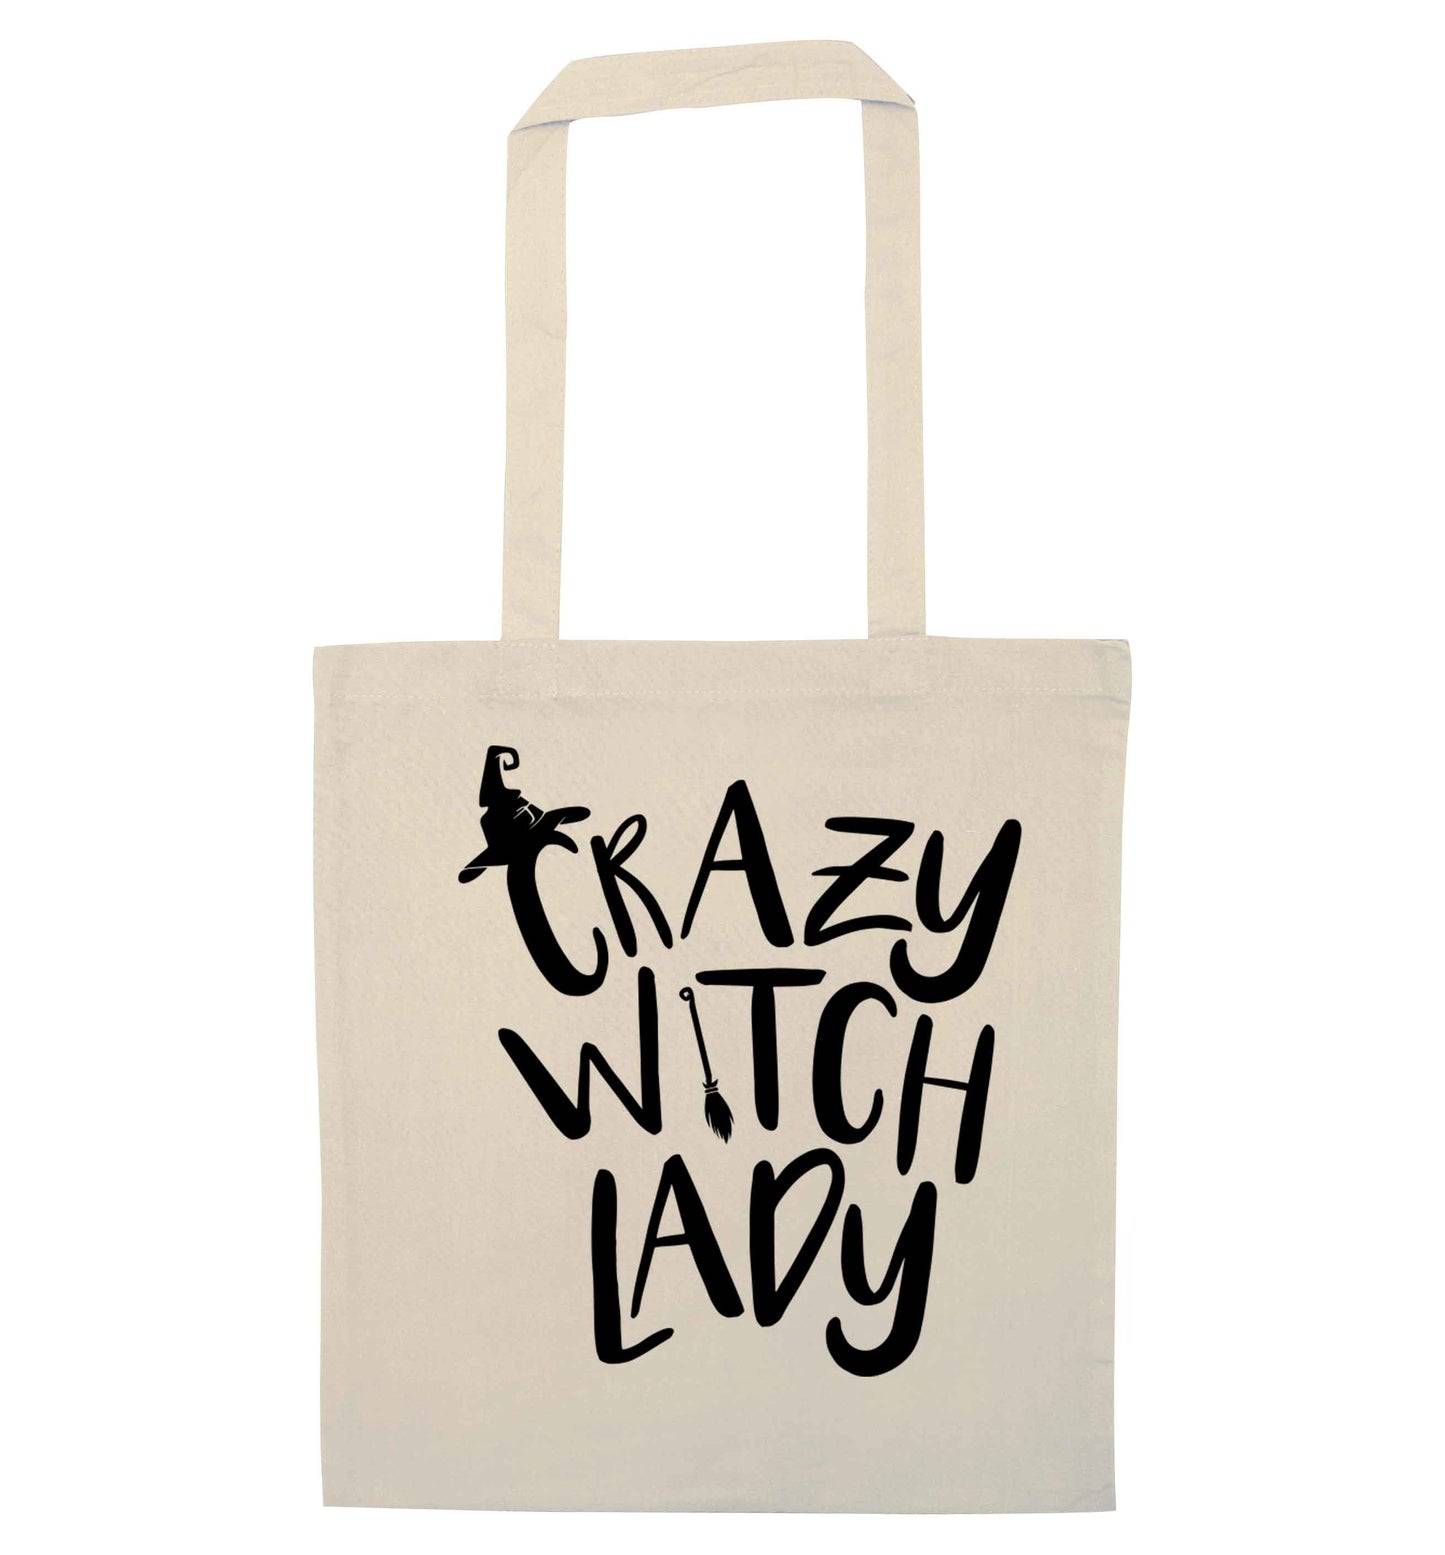 Crazy witch lady natural tote bag